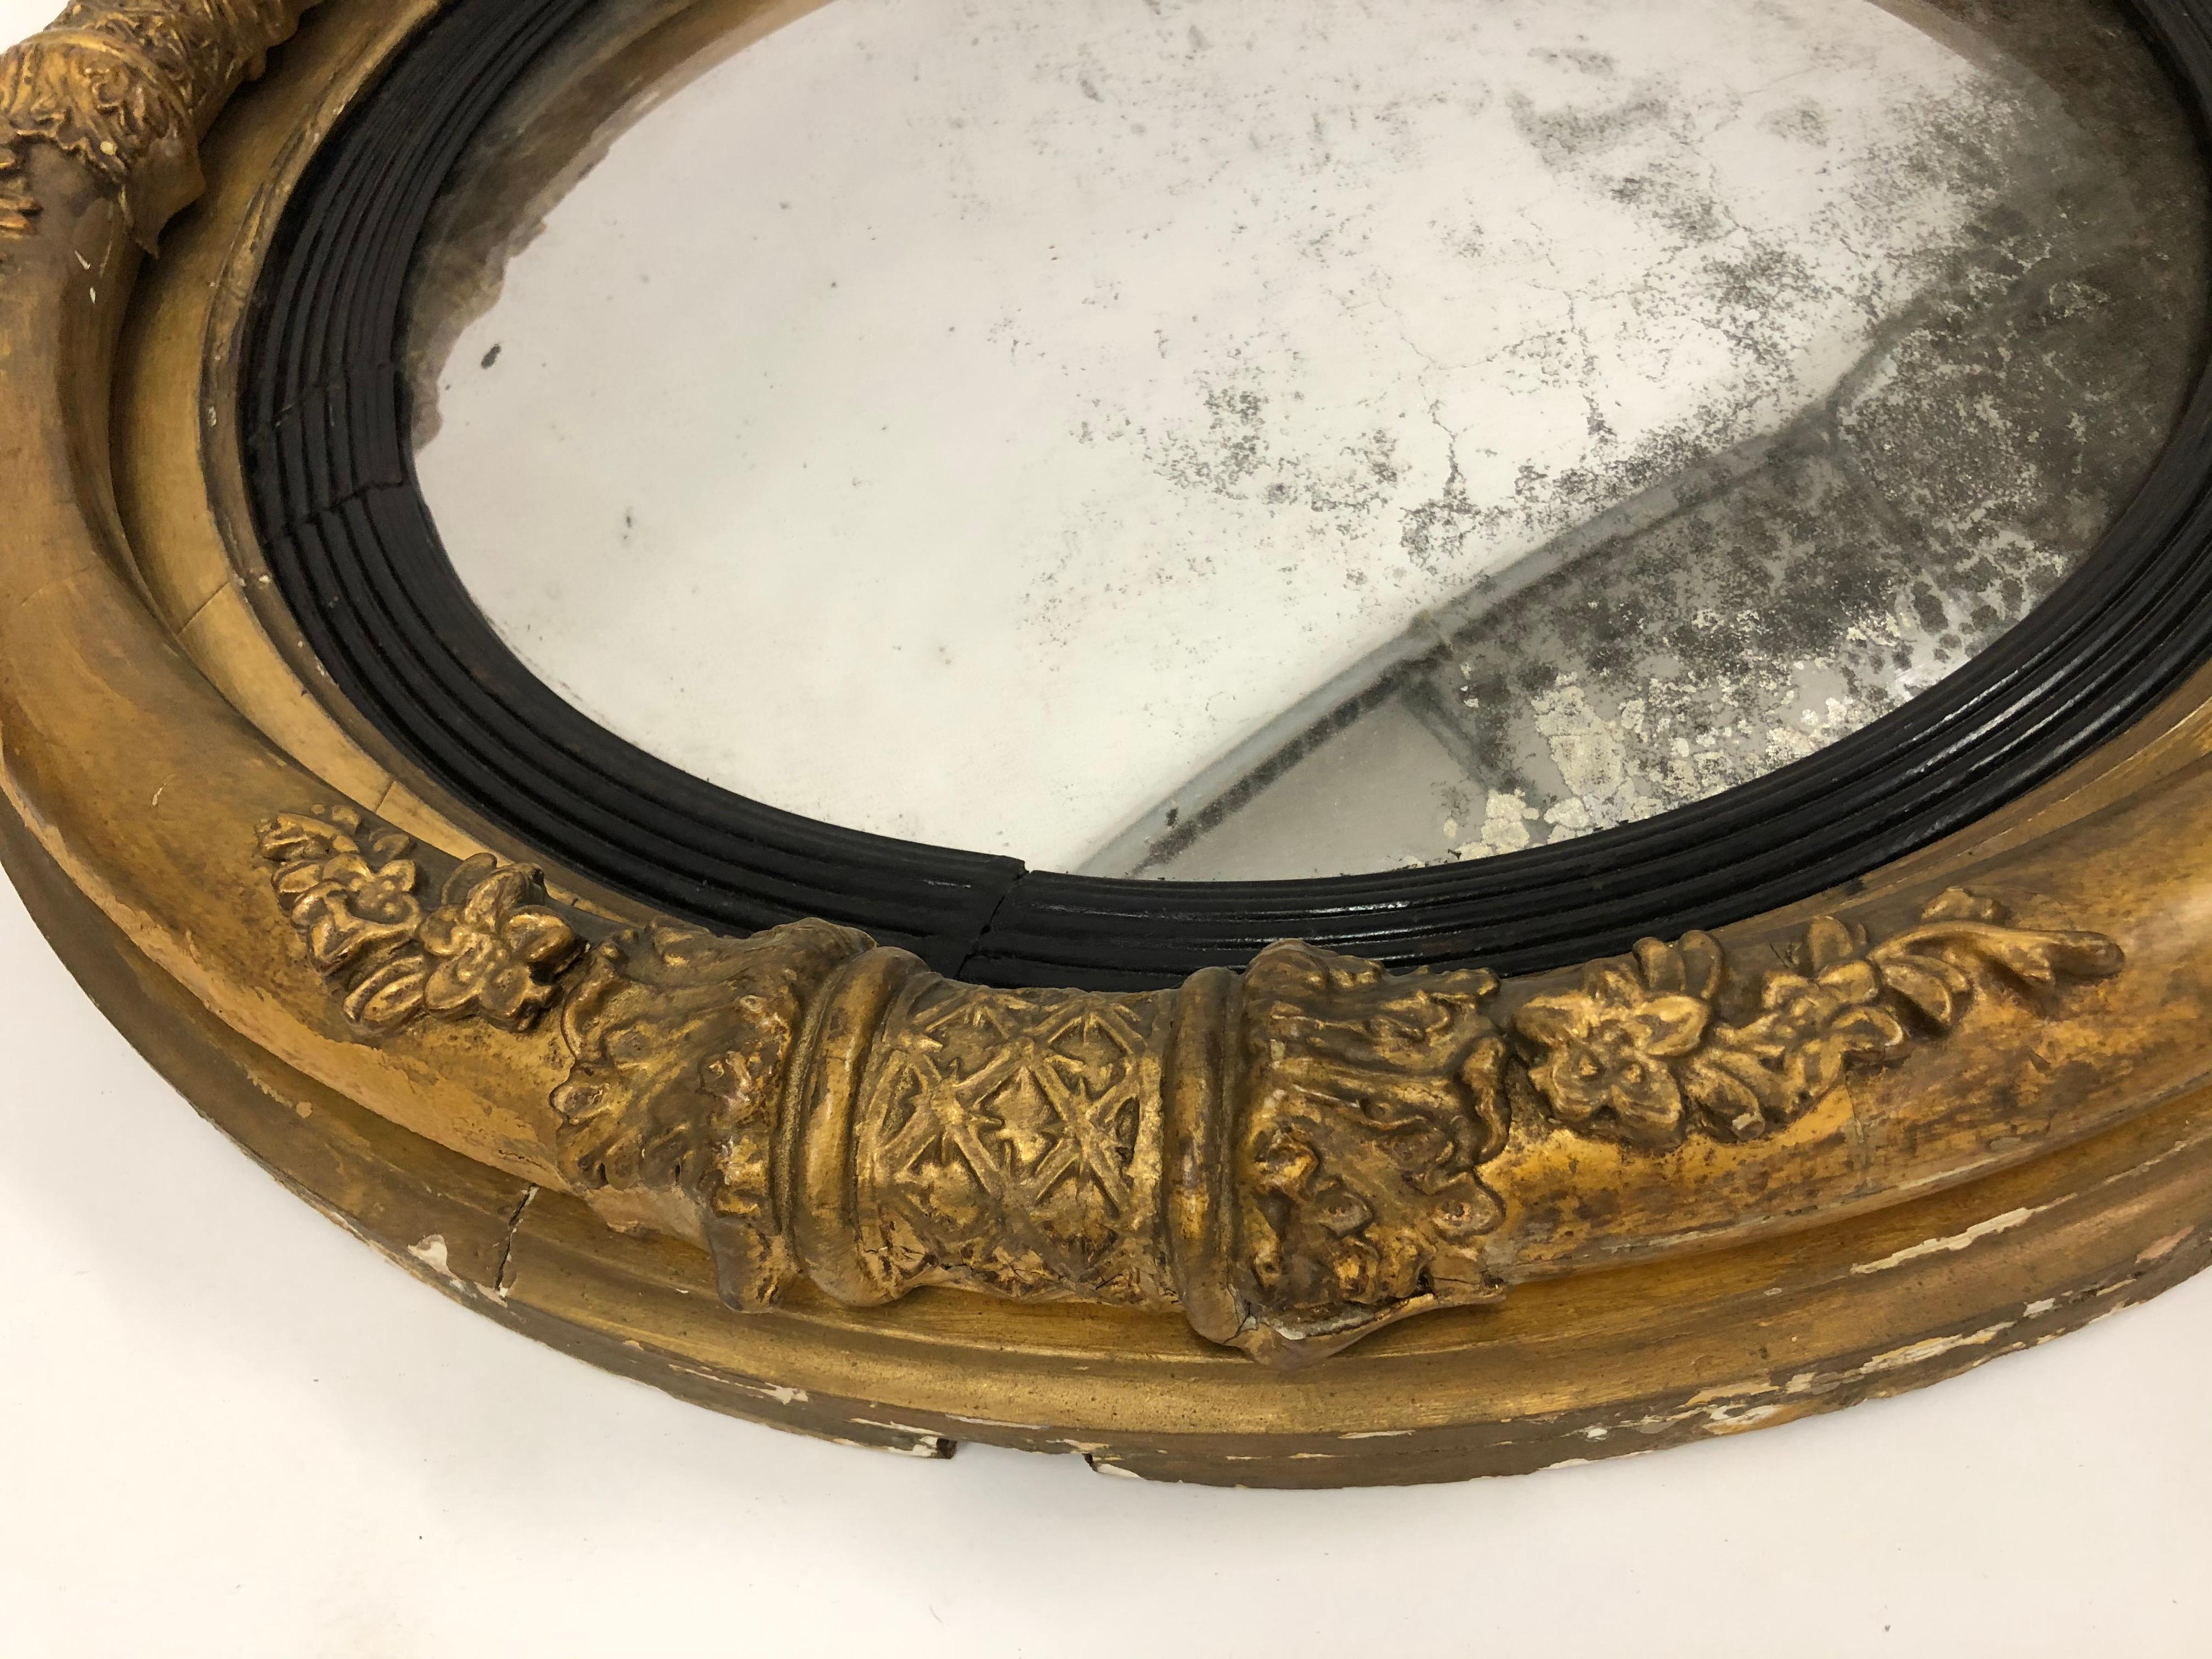 Antique gilded mirror with decorative carvings. The diameter is 25